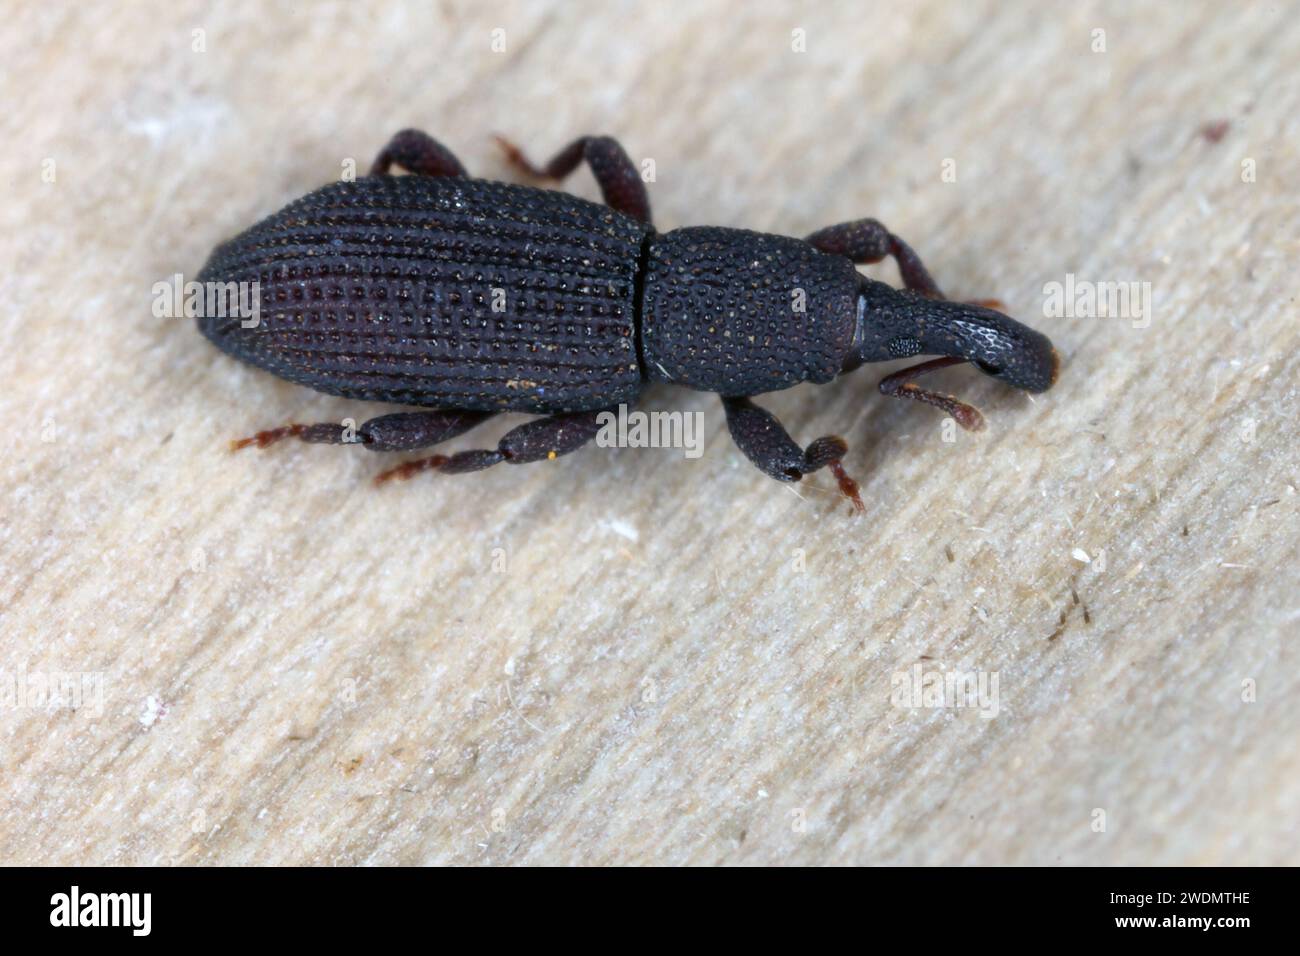 A beetle (snout beetles or true weevils, Curculionidae, Cossoninae, Dryotribus)  observed under the bark of a tree on the island of Mauritius. Stock Photo